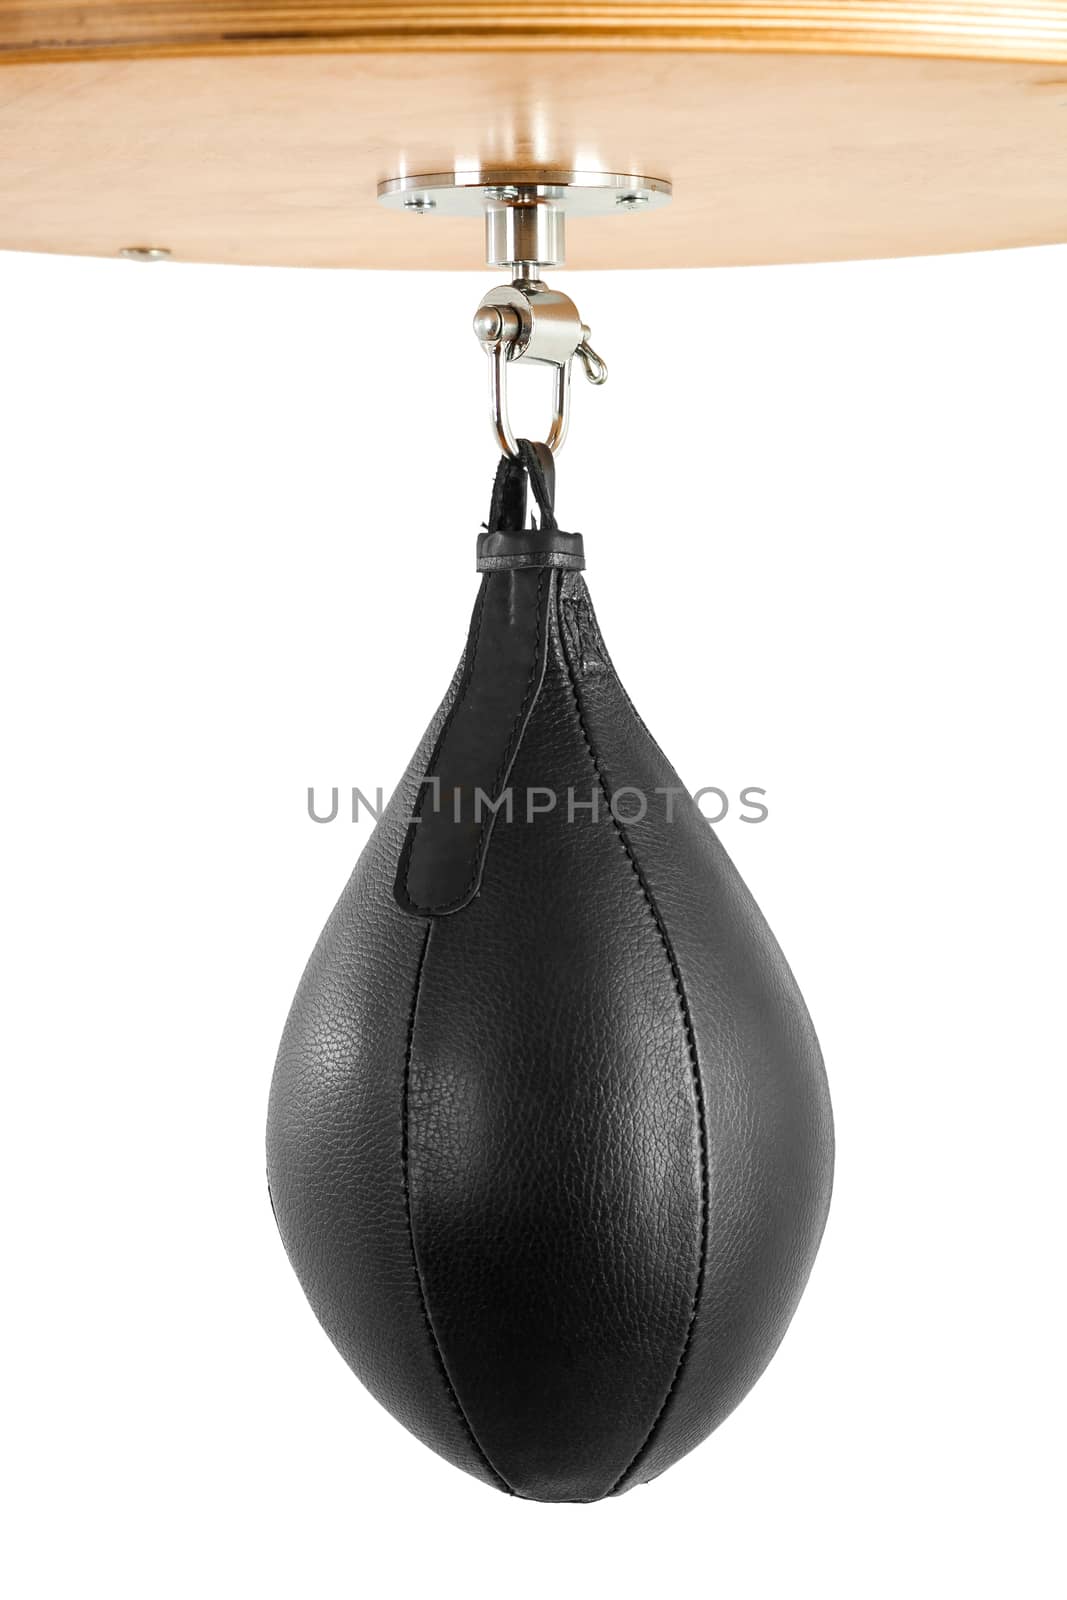 Boxing pear hanging on the isolated white background